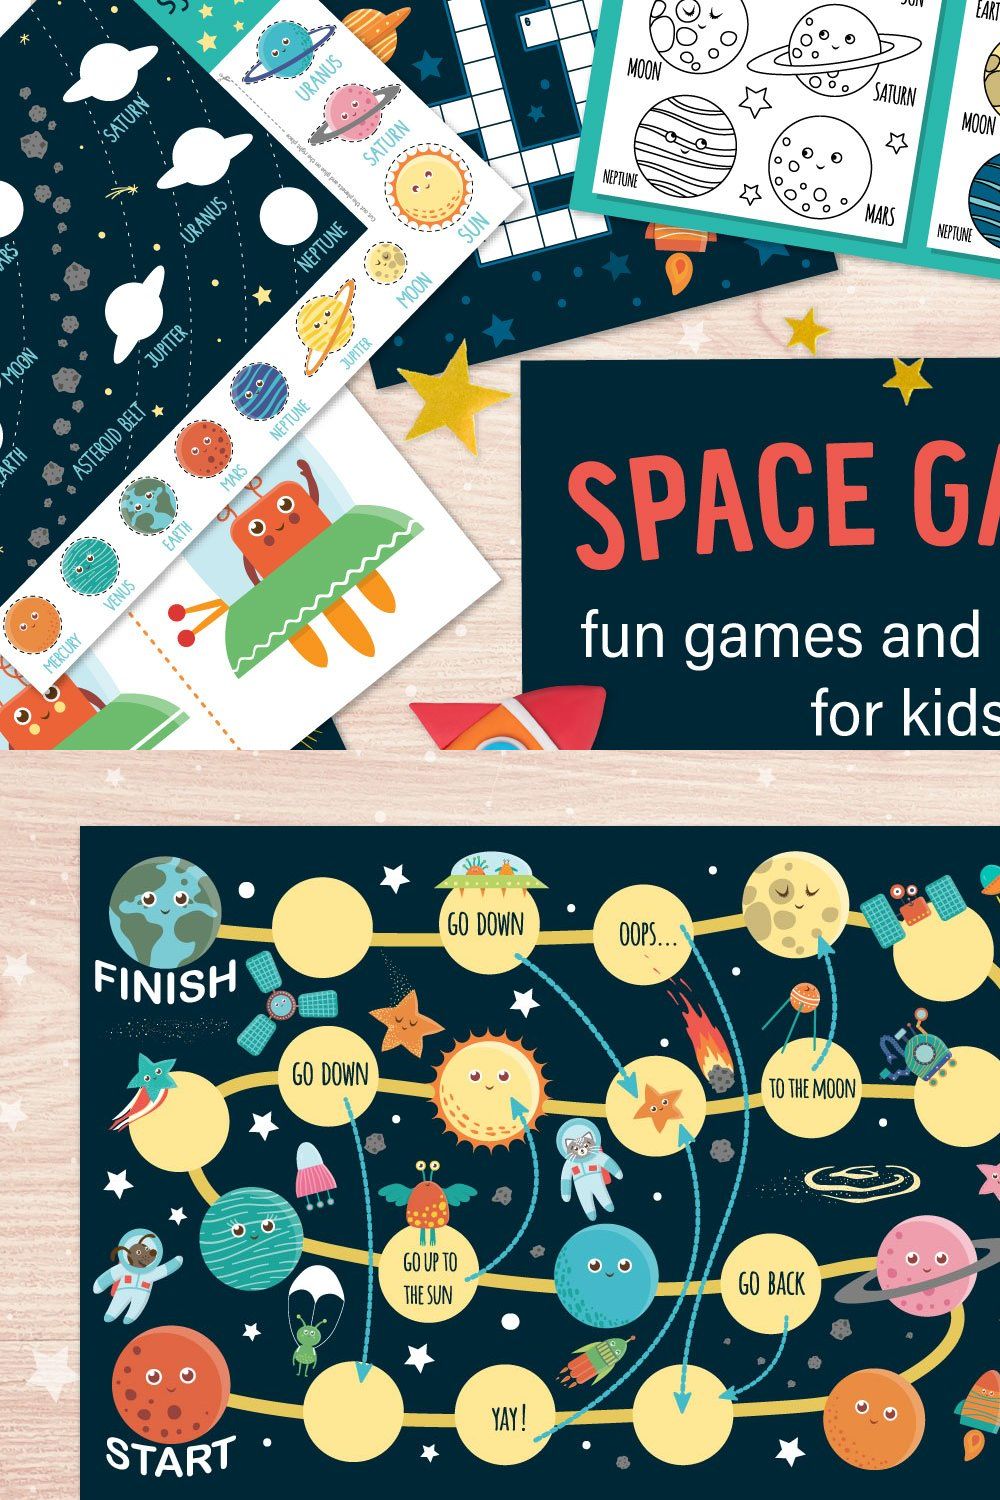 Space Games pinterest preview image.